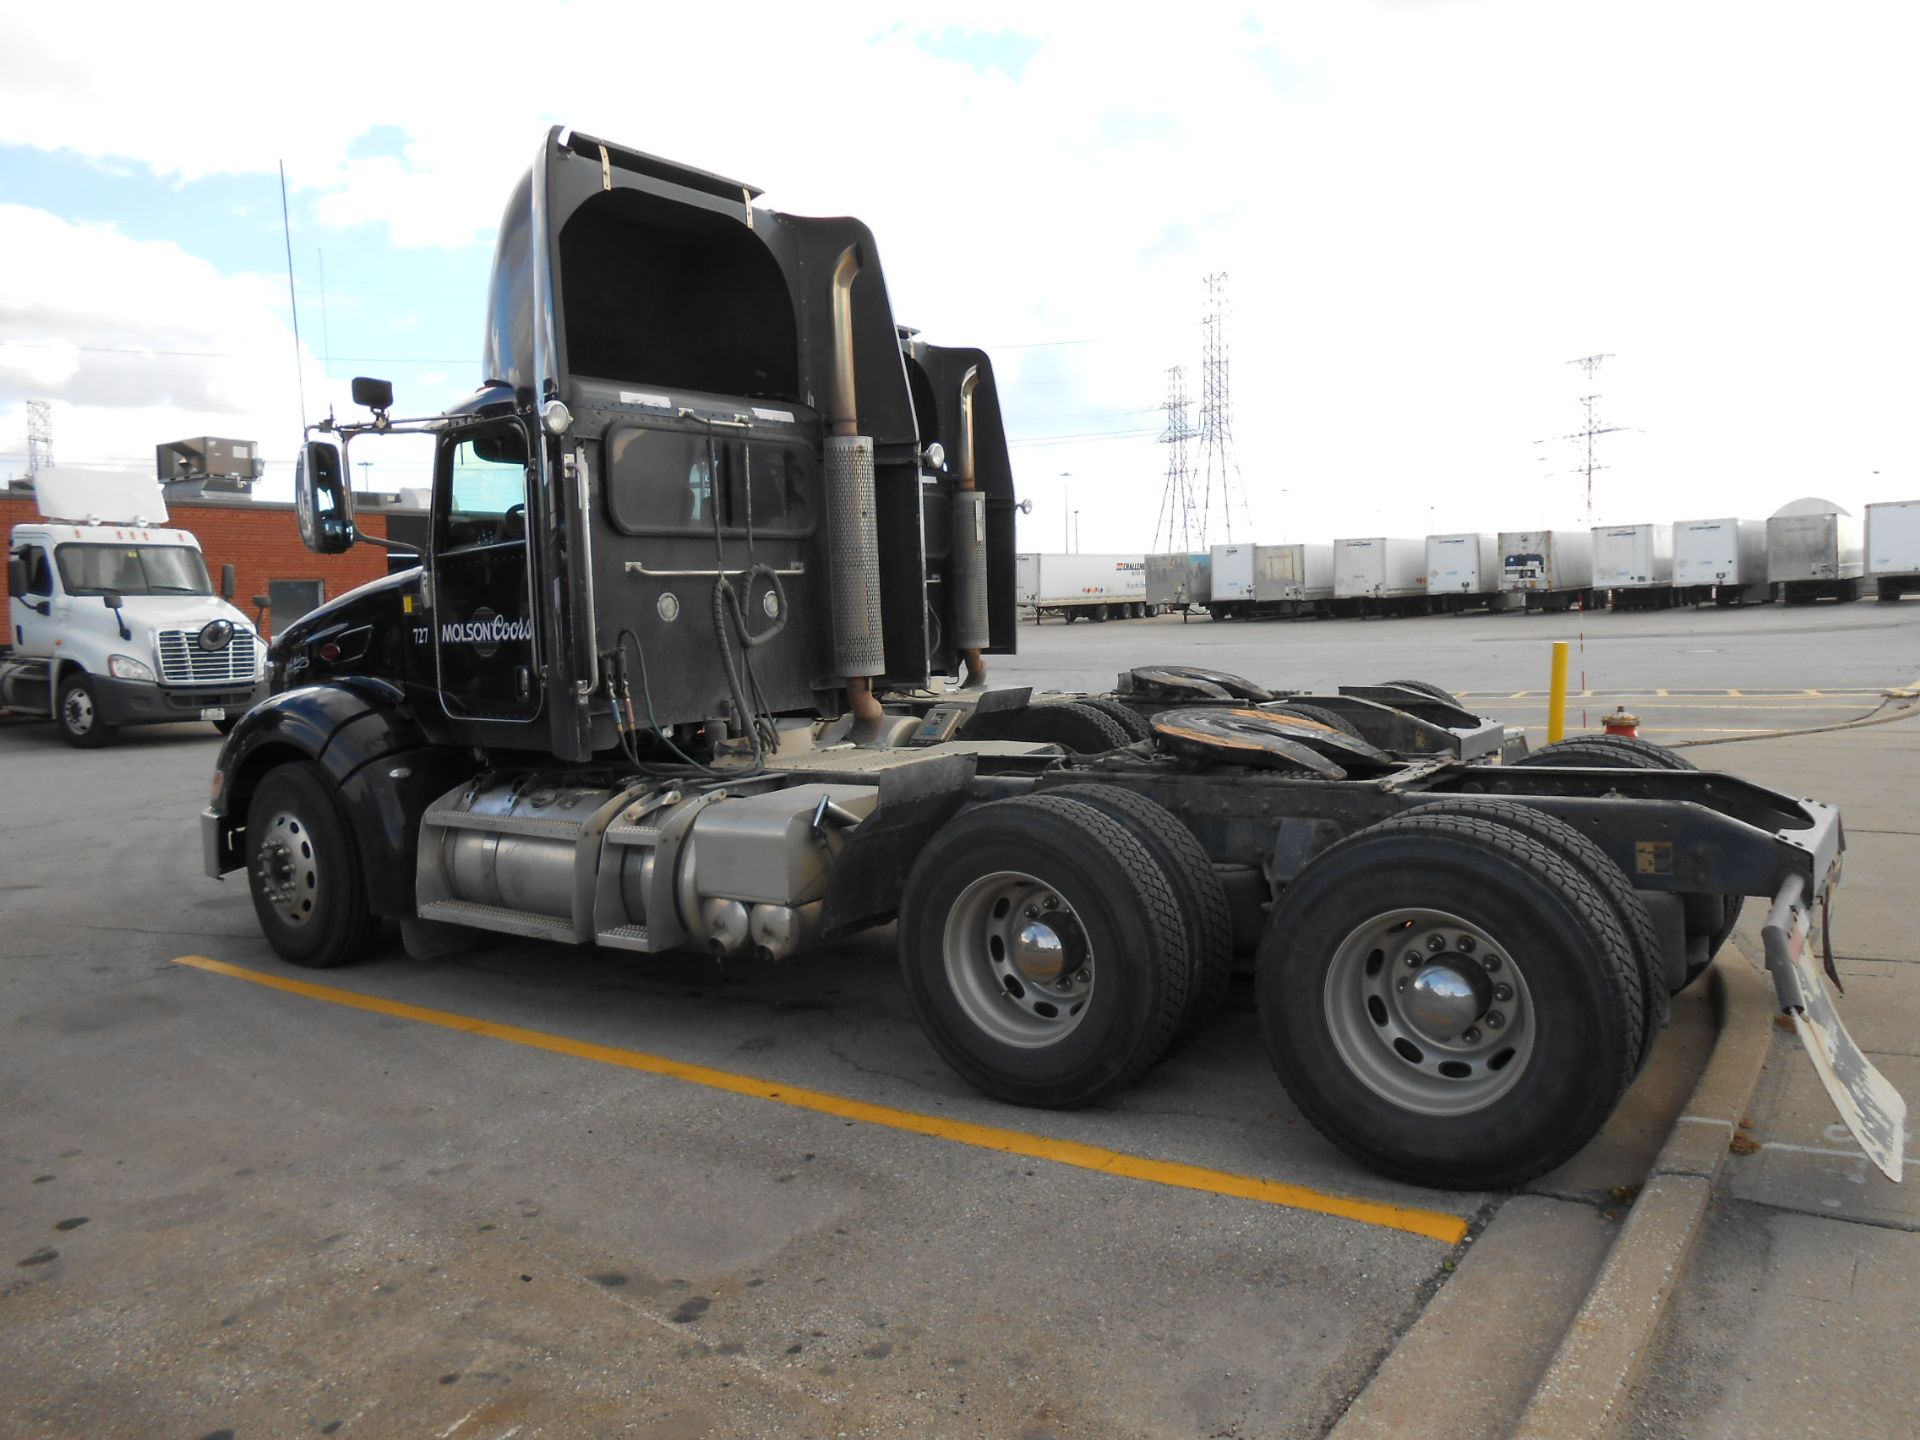 2011 Peterbilt 6X4 DAY CAB TRUCK, model 386 chassis 8070 kg weight with Cummins ISX15 485 diesel ( - Image 4 of 16